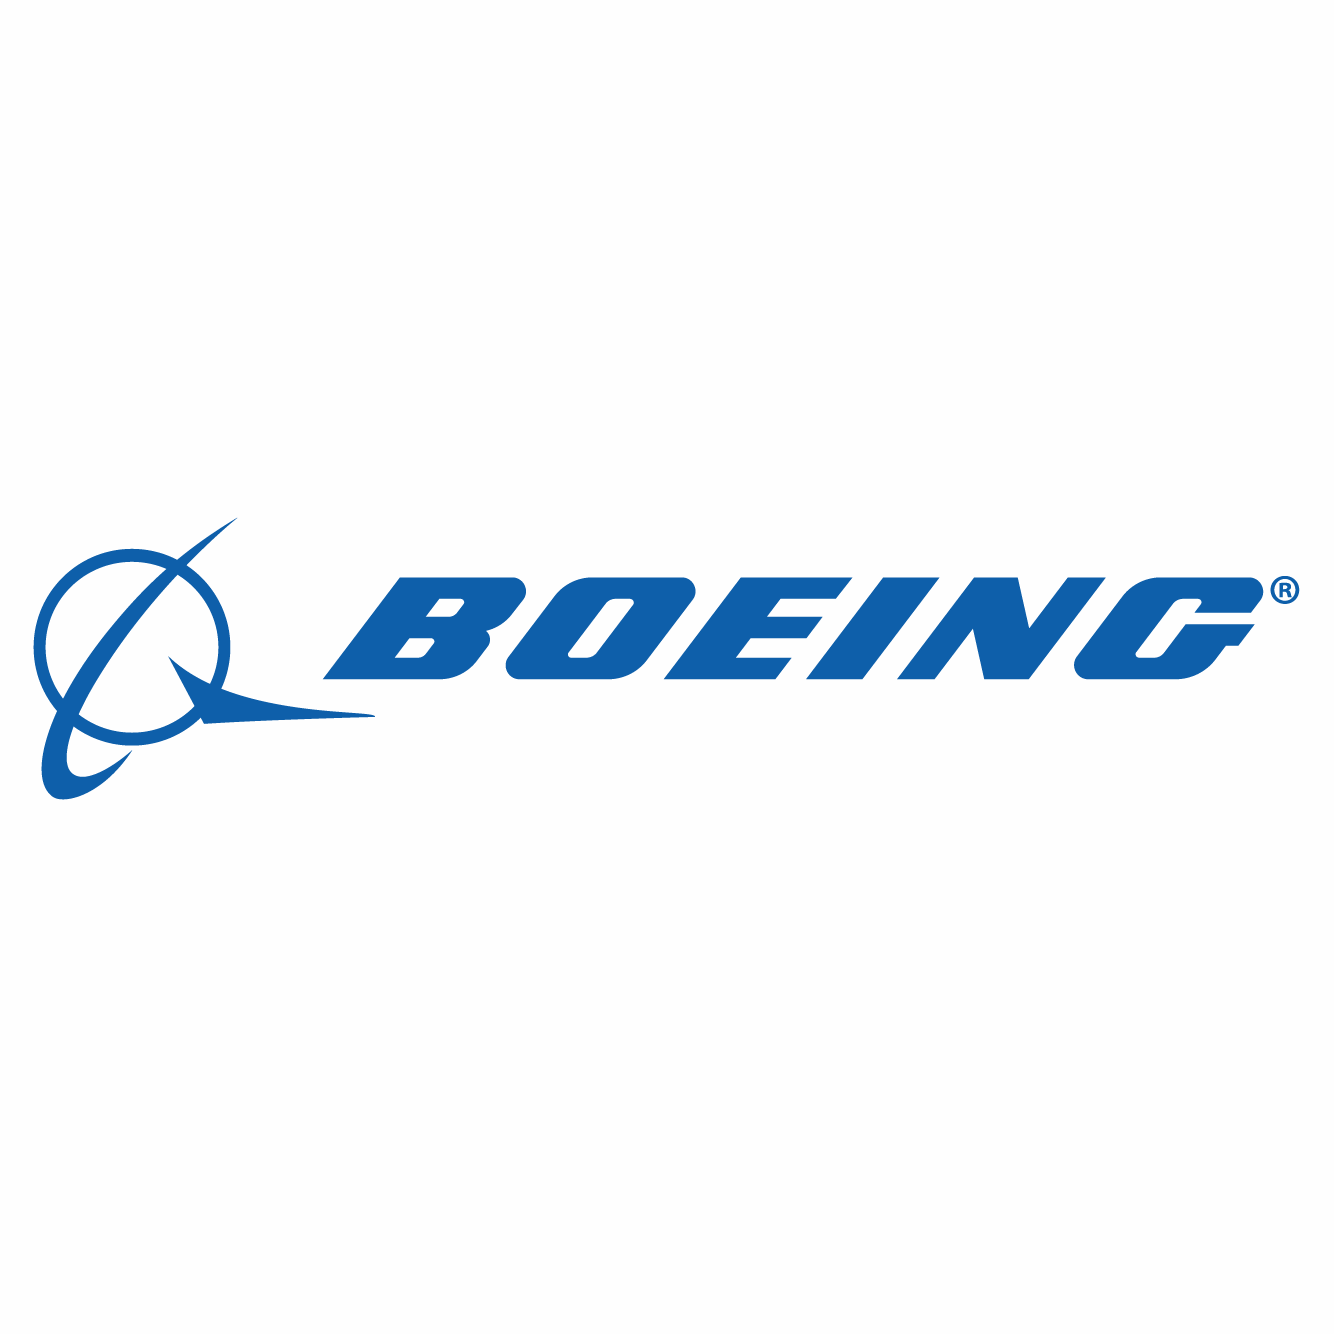 https://securetech.ae/wp-content/uploads/2019/02/07.BOEING.png